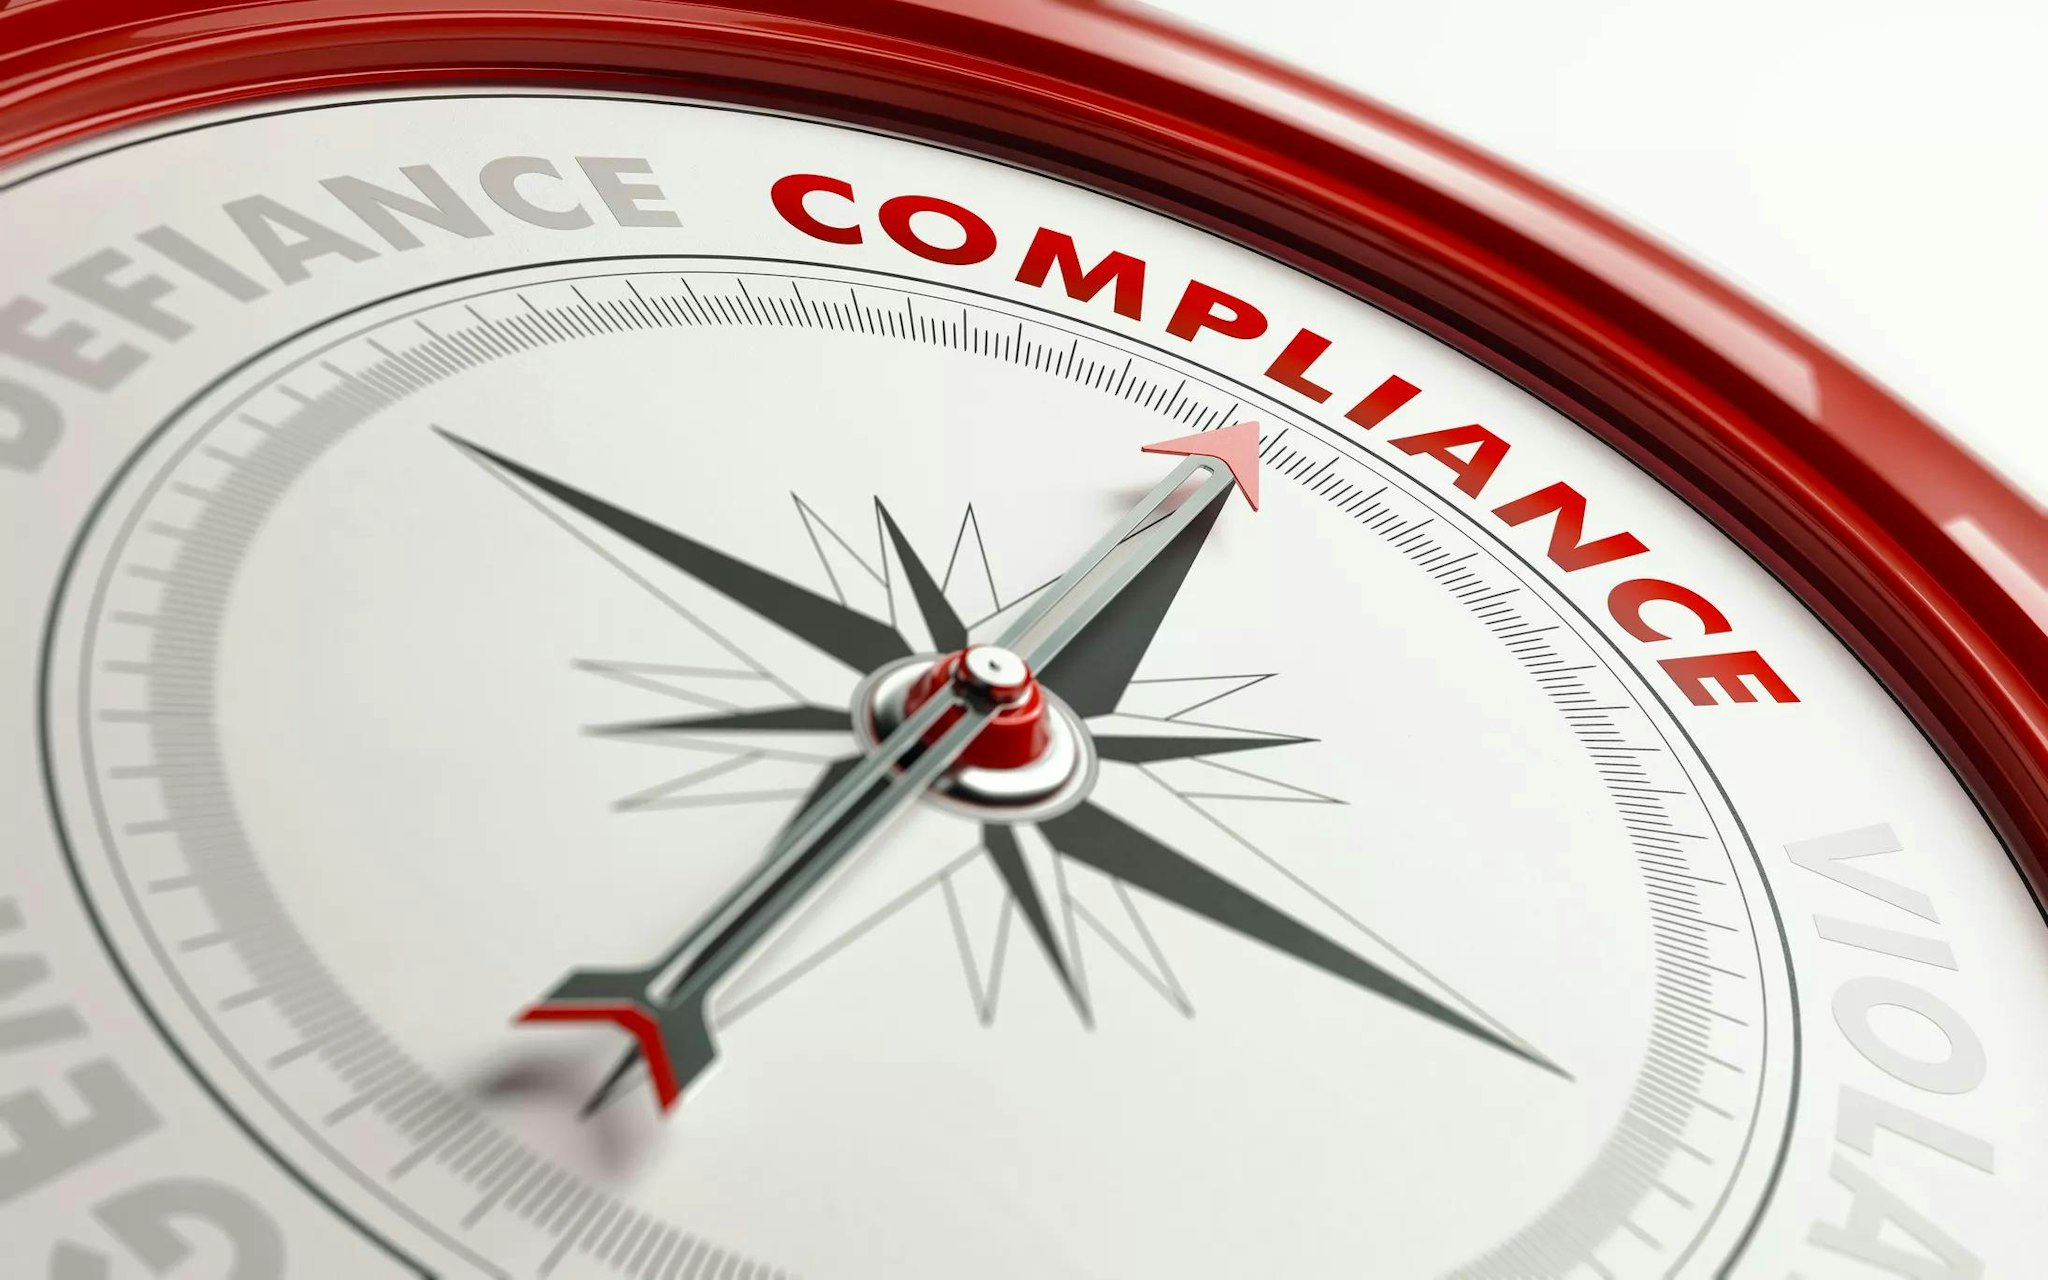 Compass that points to the word "compliance"